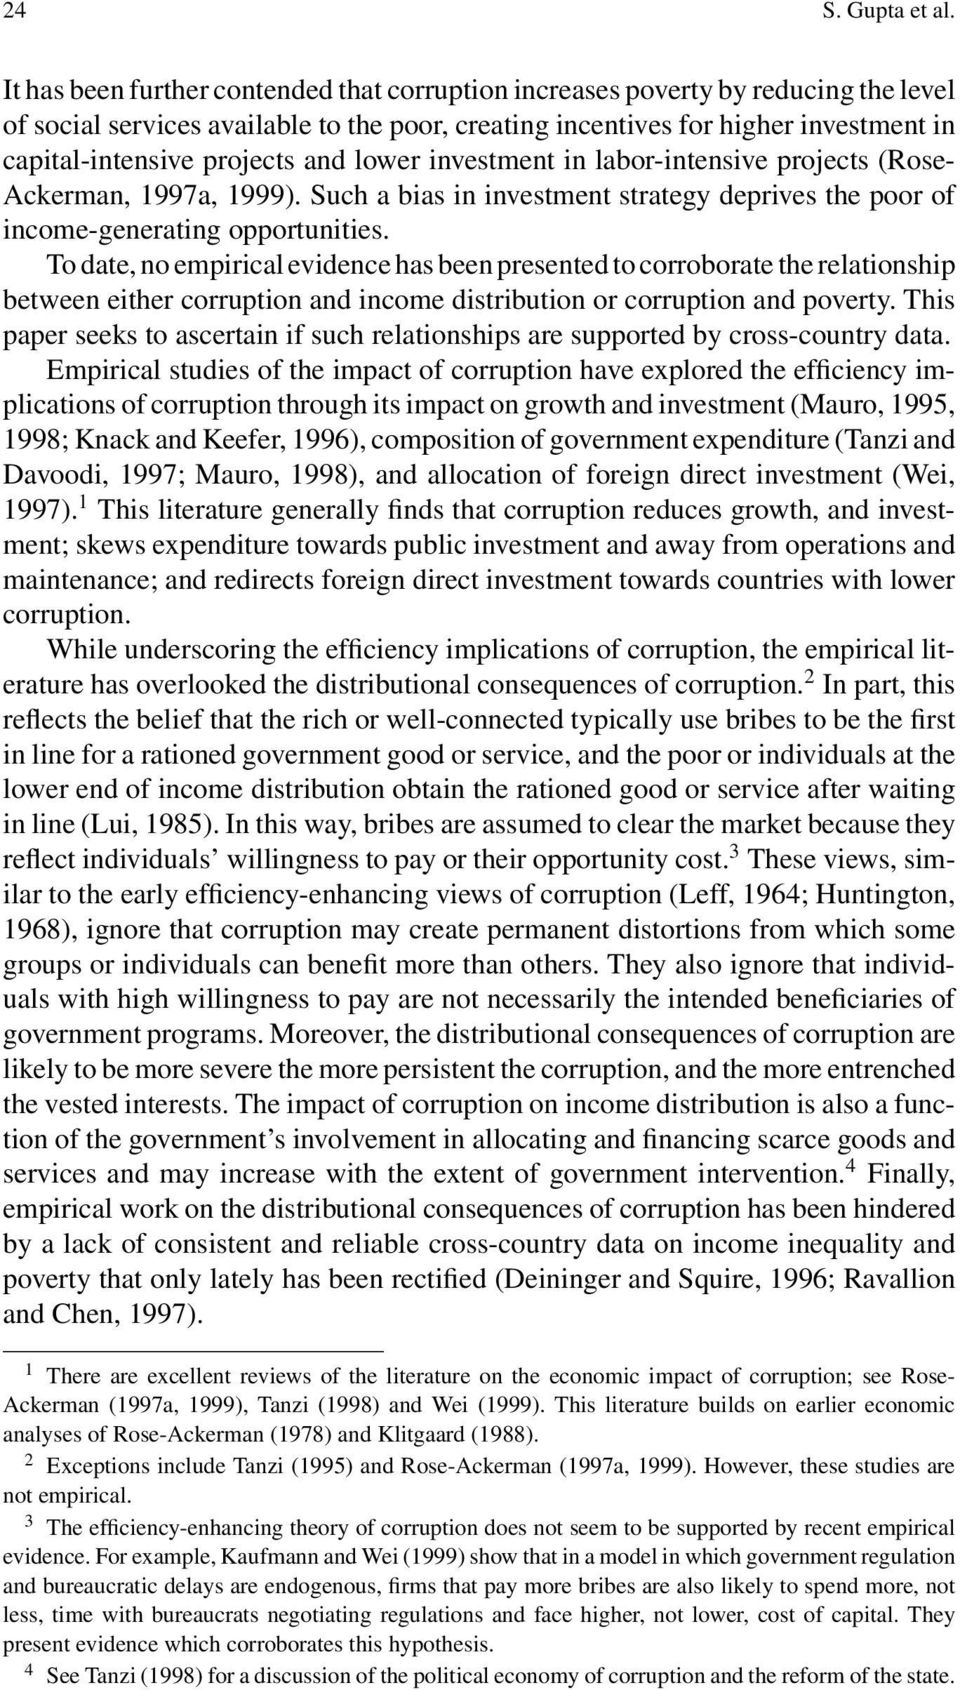 and lower investment in labor-intensive projects (Rose- Ackerman, 1997a, 1999). Such a bias in investment strategy deprives the poor of income-generating opportunities.